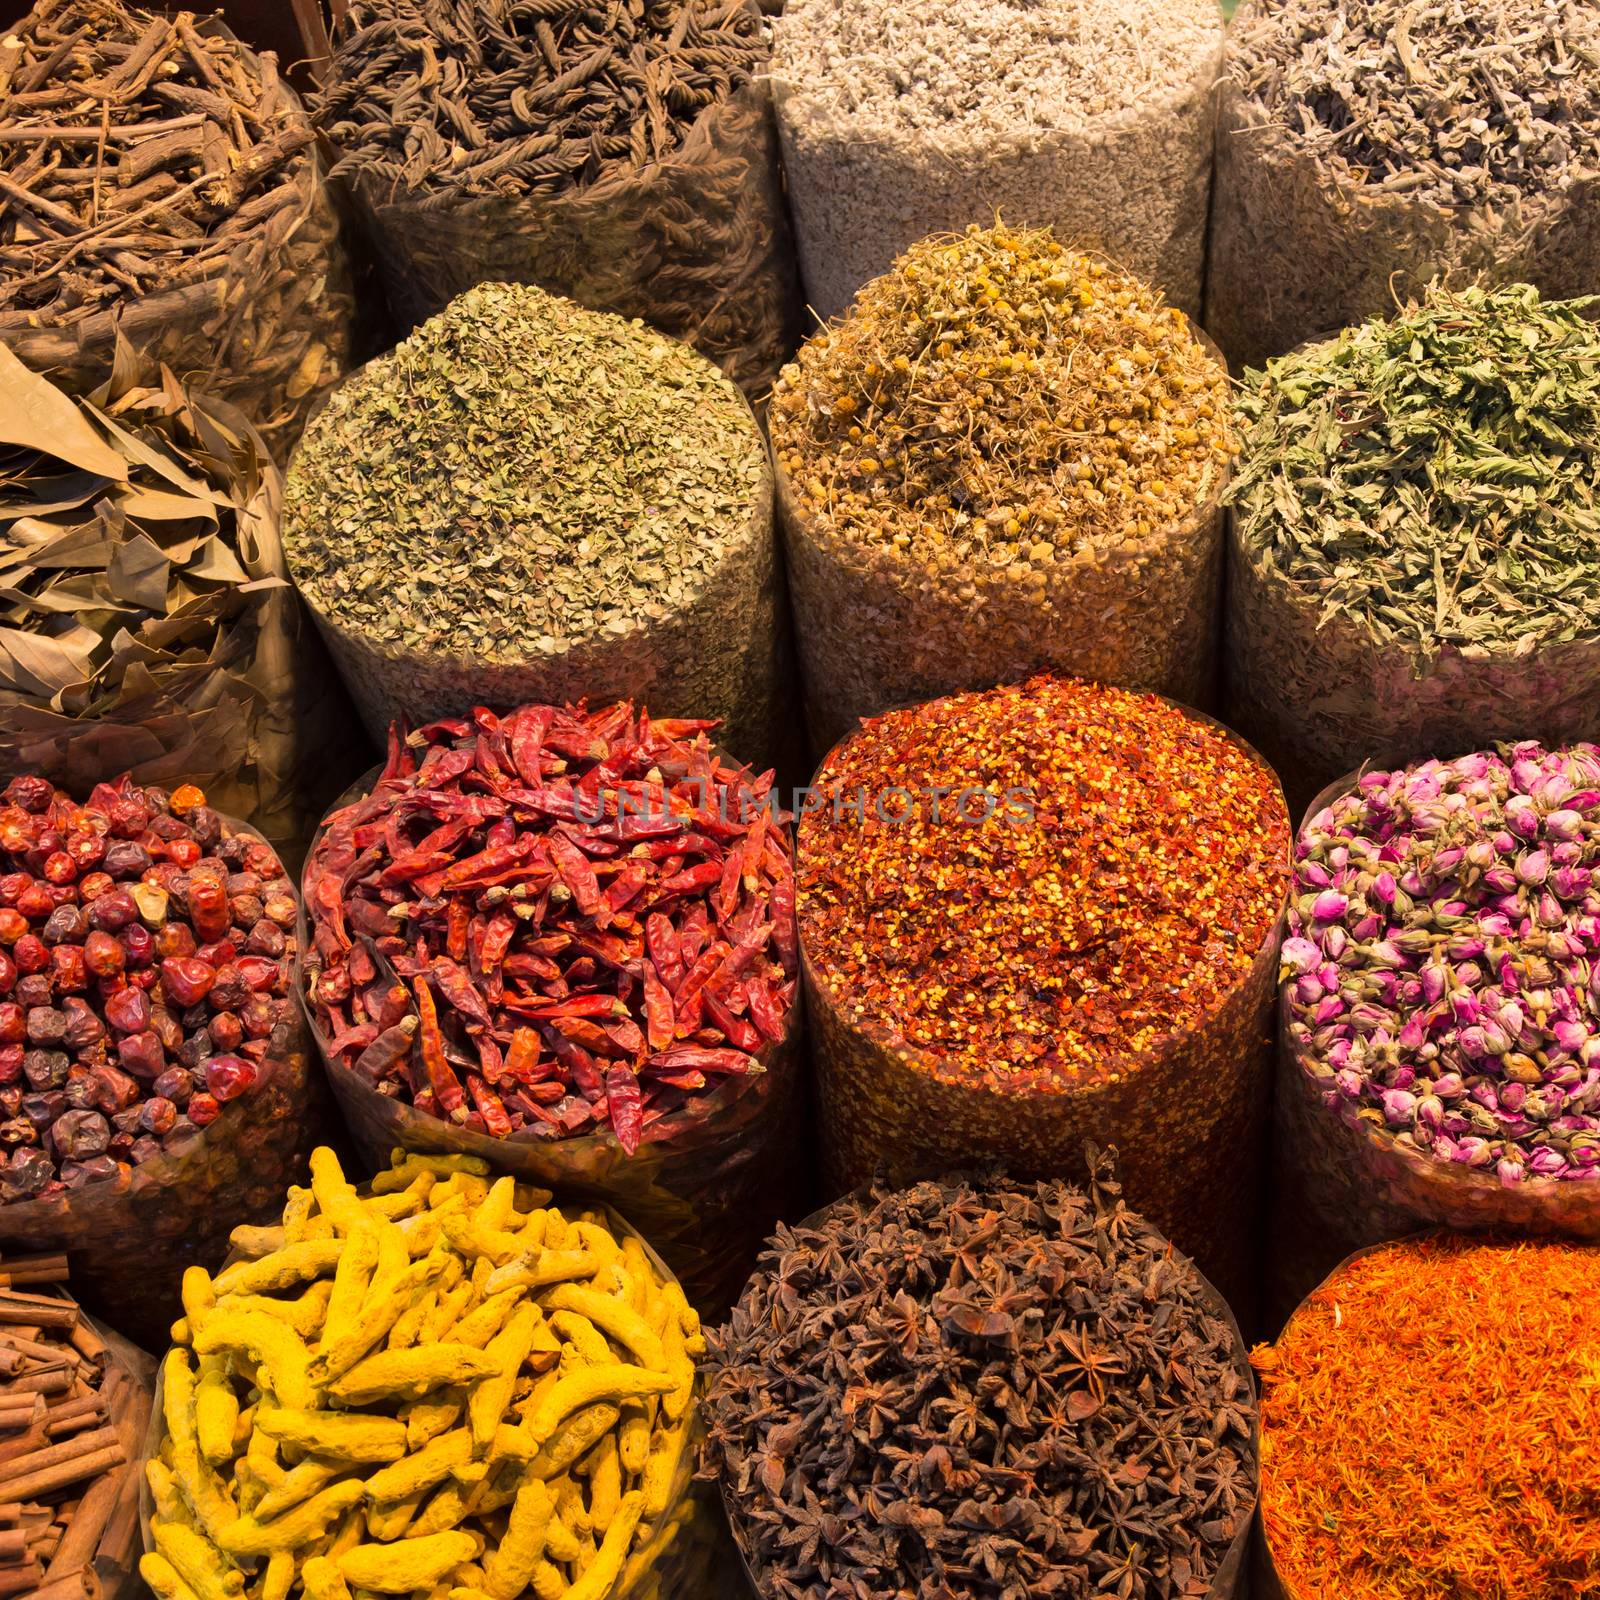 Spices and herbs being sold on street stal at Morocco traditional market.